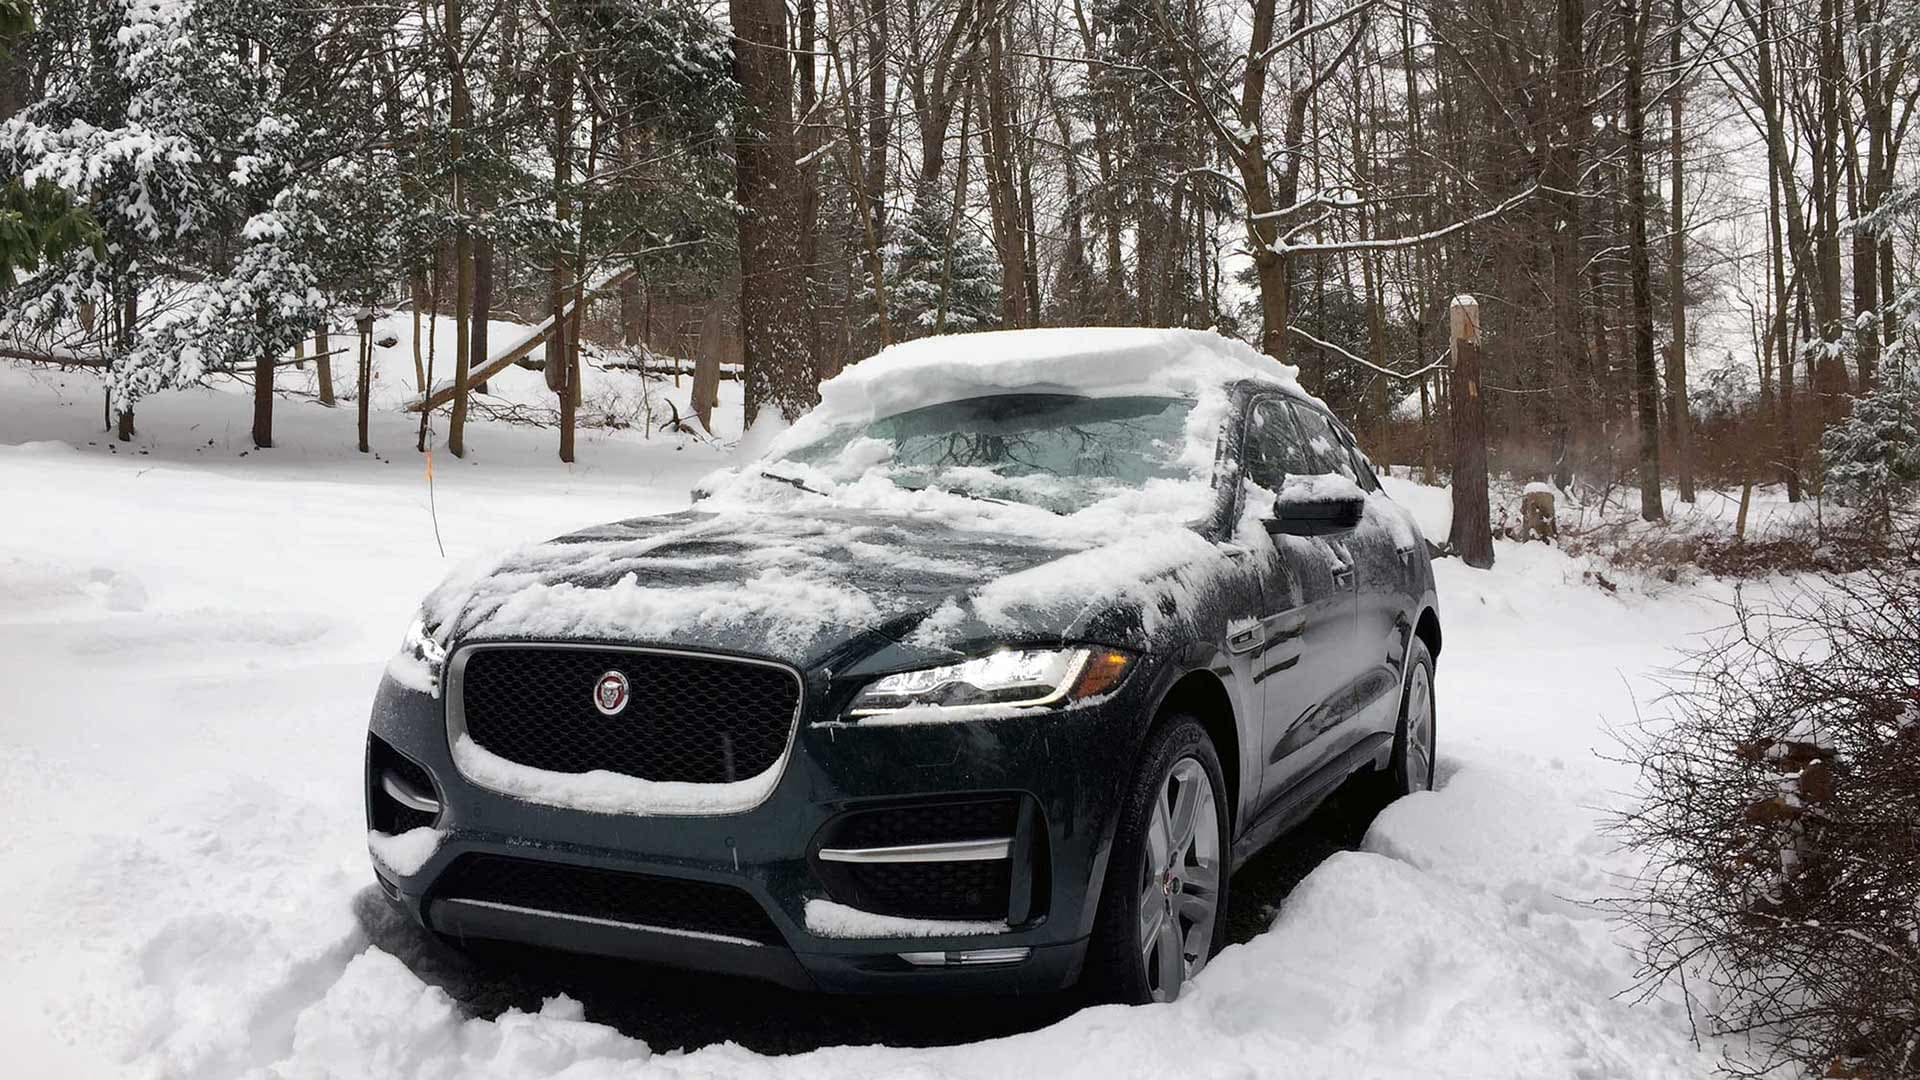 The 2017 Jaguar F-Pace Is Driving Excellence Mixed With Infotainment Frustration